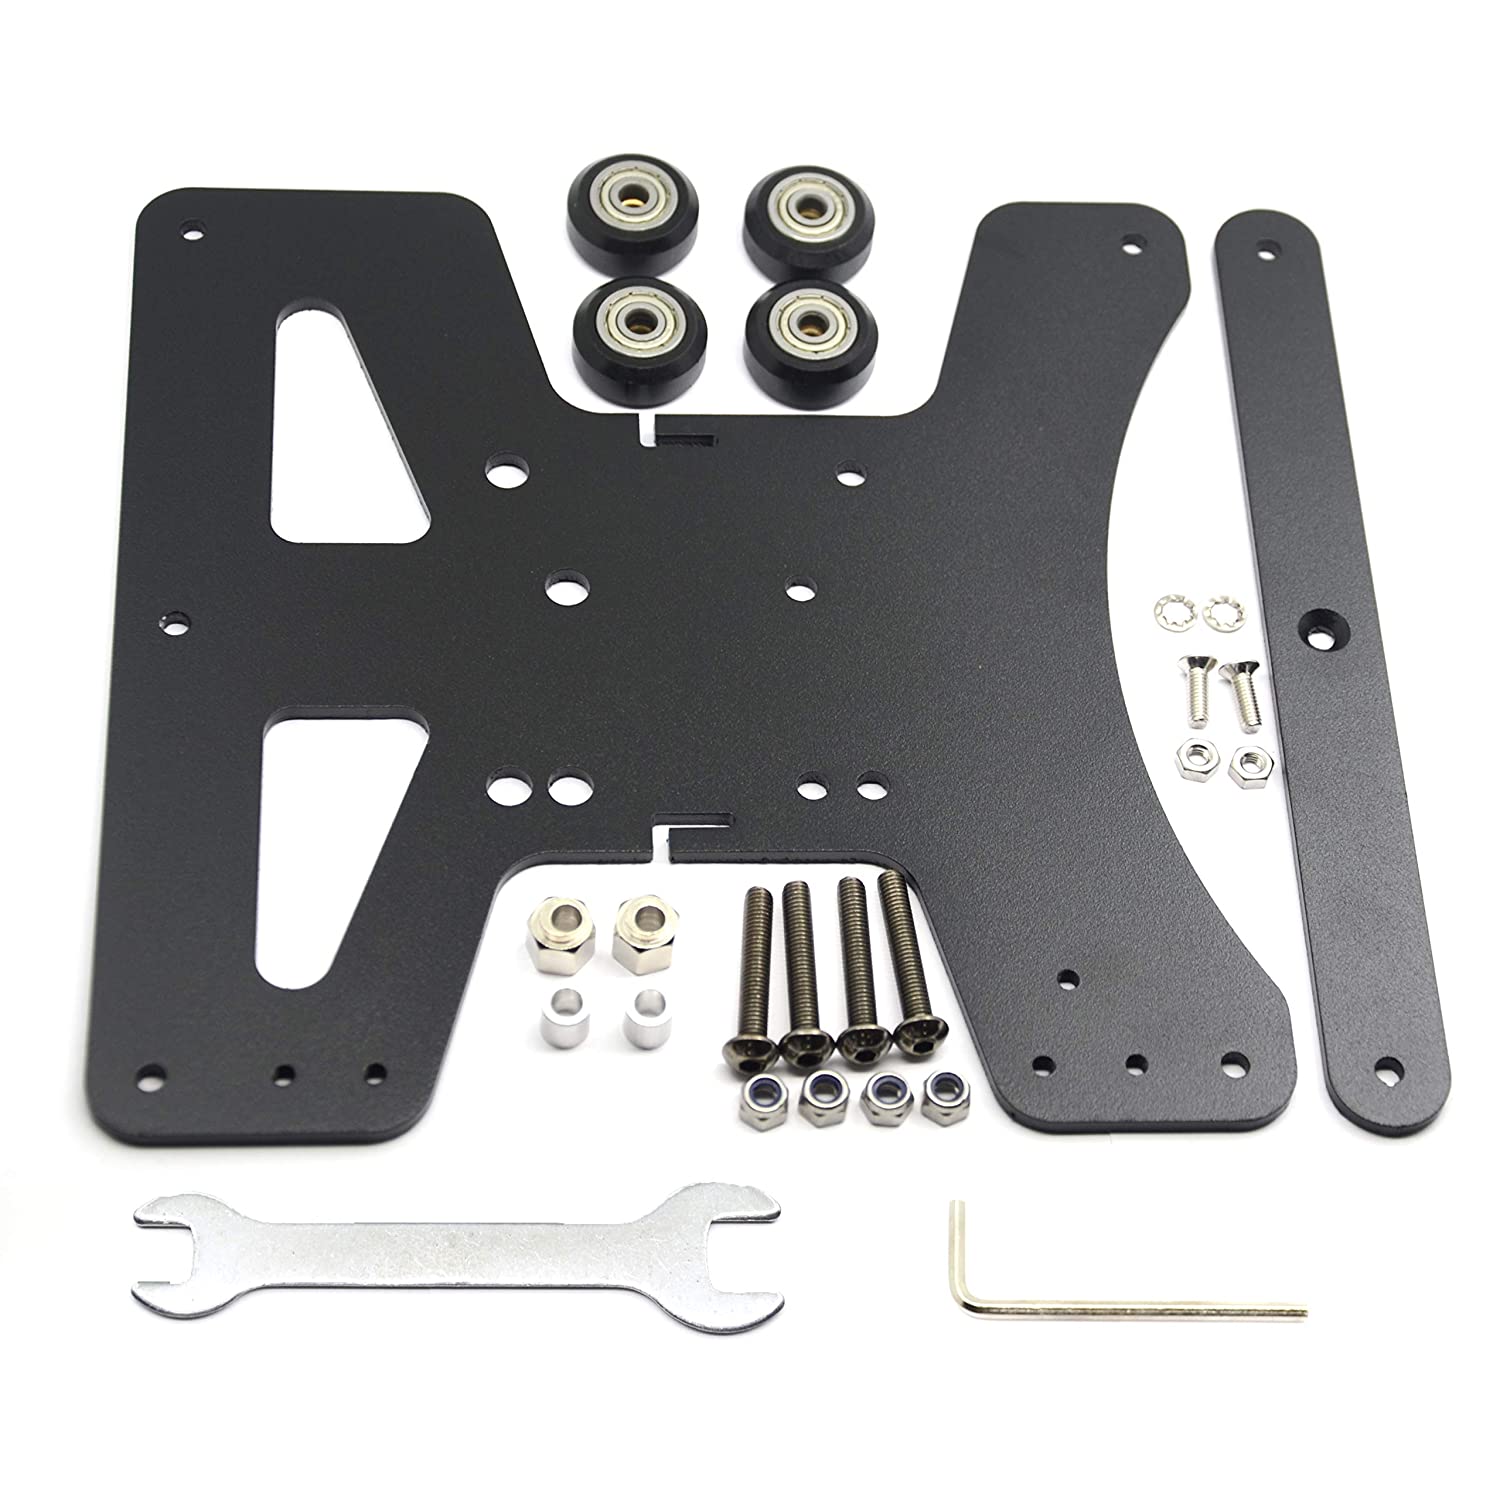 Creality 3D® Aluminium V2 Modular Y Carriage Plate Upgrade Kit with 3-Point Leveling Adjustment for Creality Ender 3 / Ender 3 Pro